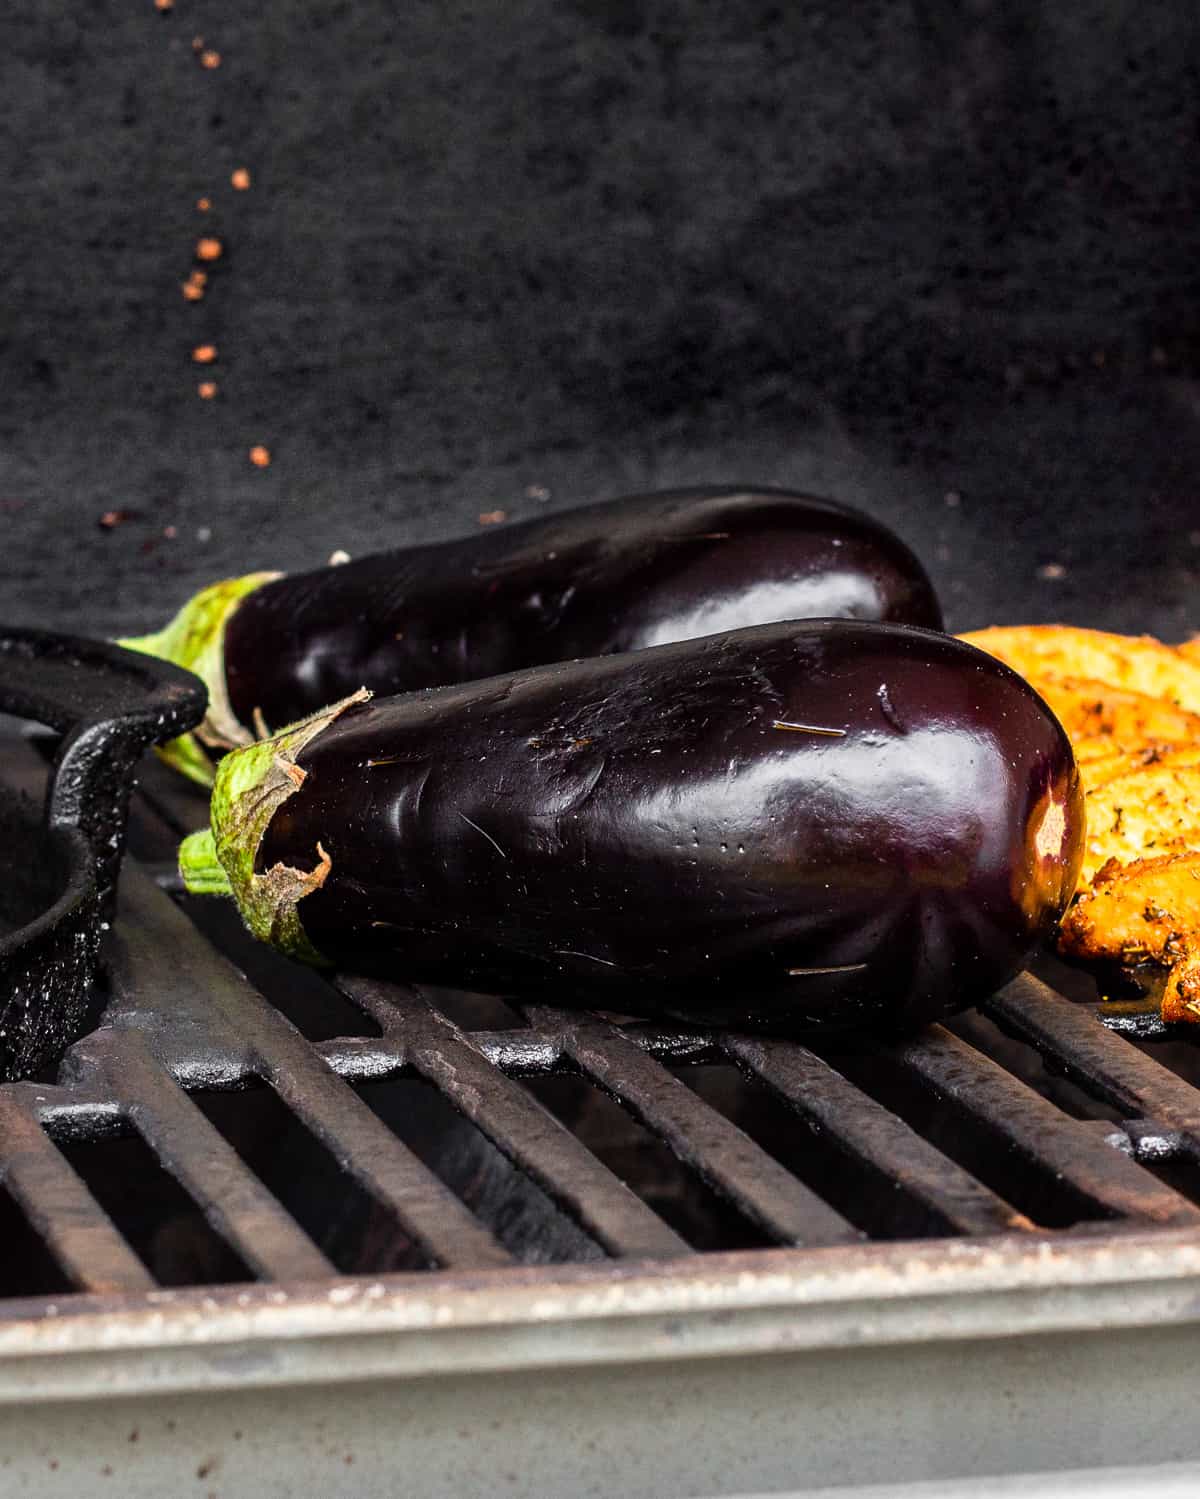 Two whole eggplants on a gas grill.